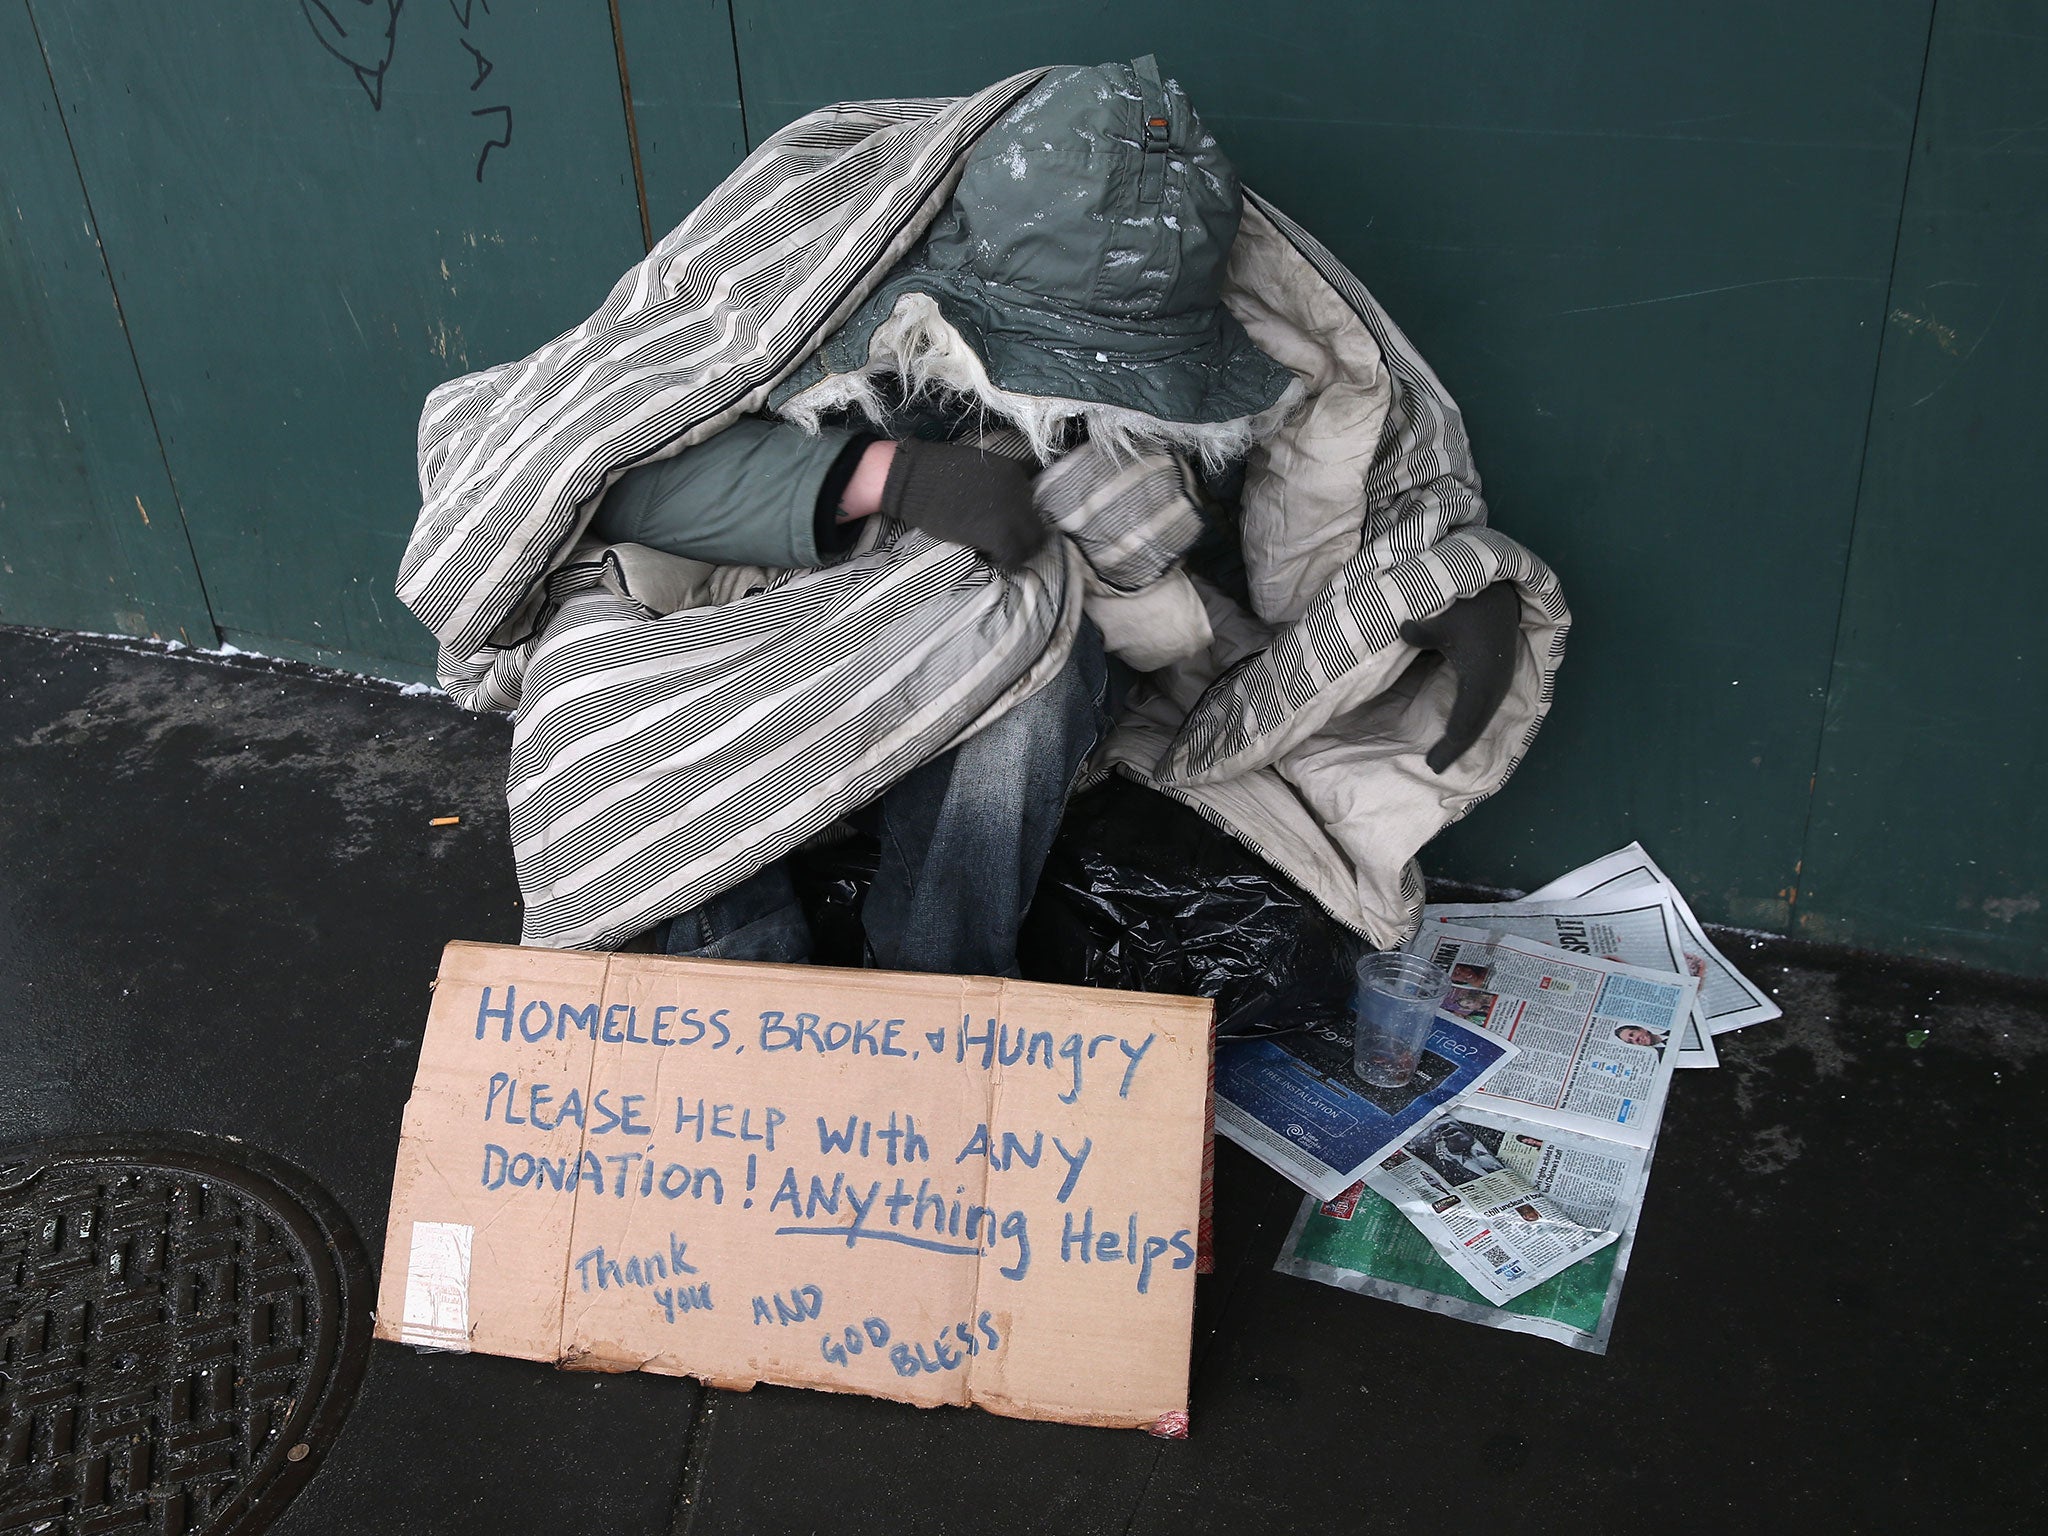 Homeless people in Hackney could be targeted by the Public Space Protection Order